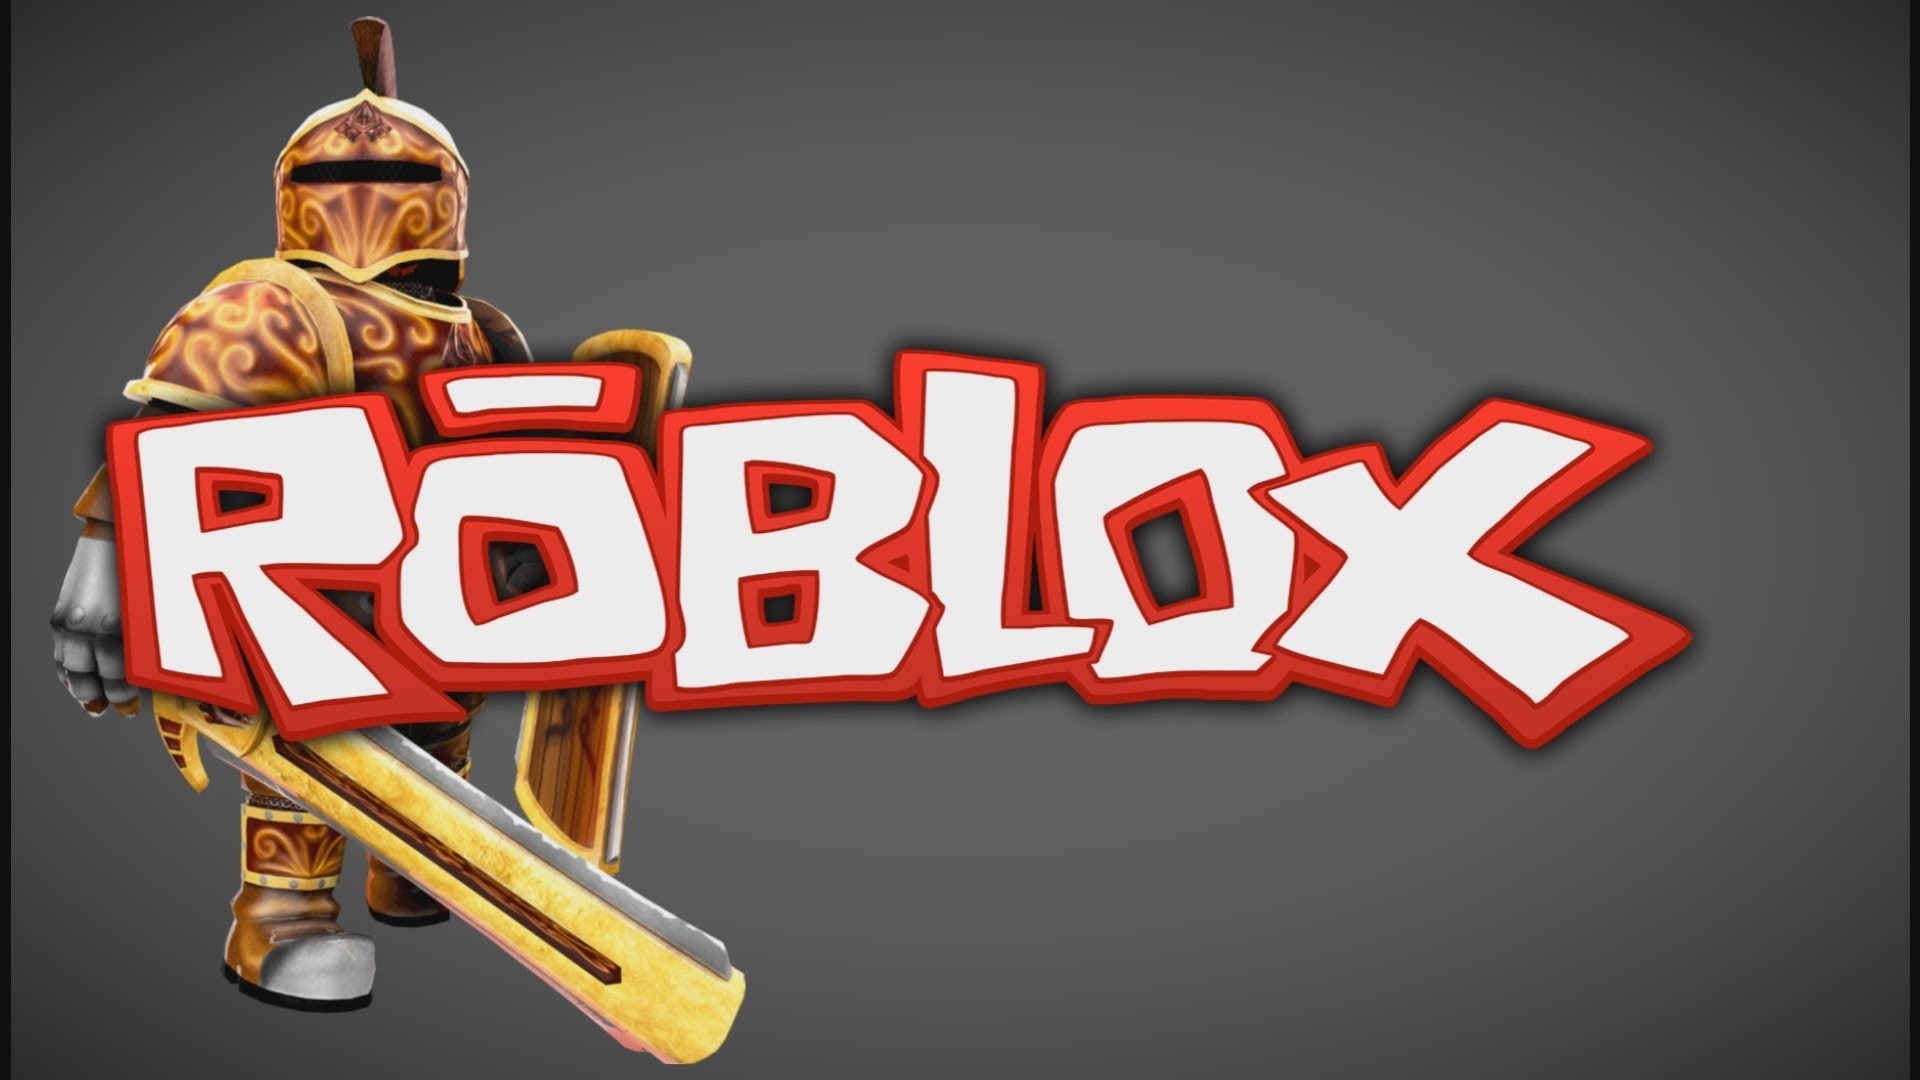 Cool Wallpapers Roblox Roblox Wallpapers Wallpaper Cave Download For Free On All Your Devices Computer Smartphone Or Tablet Kumpulan Alamat Grapari Telkomsel Dan Alamat Bank - cool roblox backgrounds